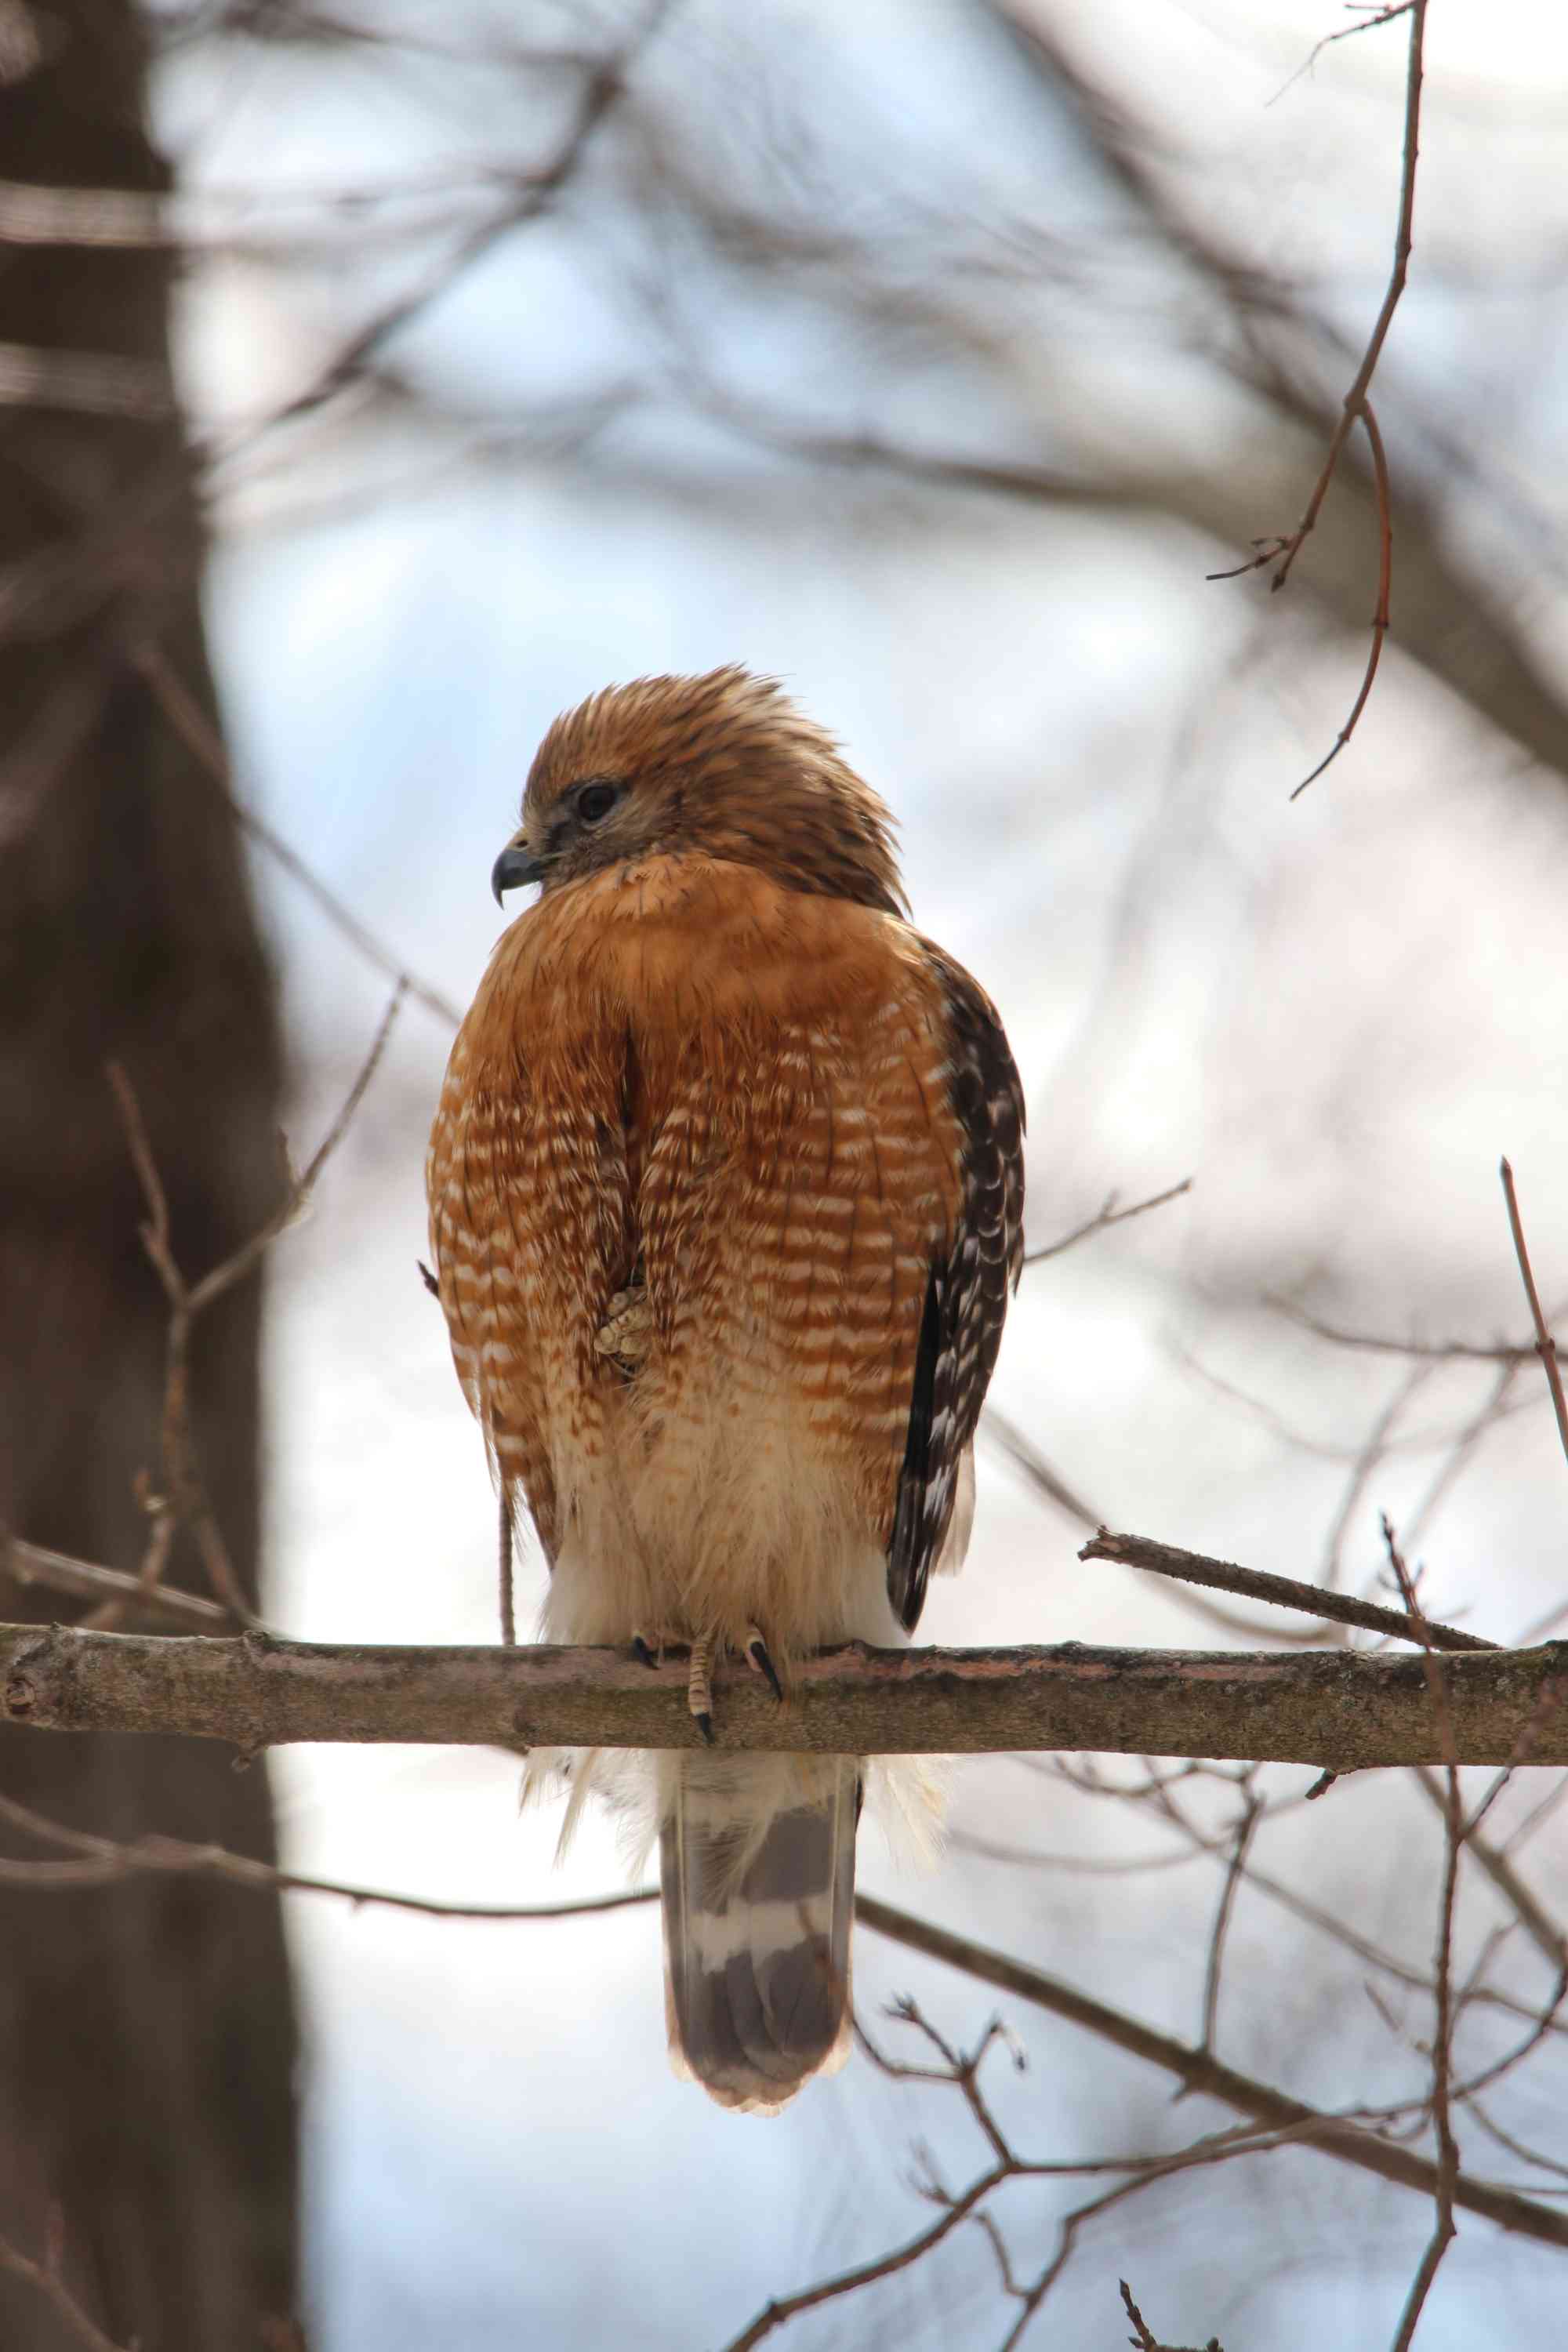 Red-shouldered hawk perched